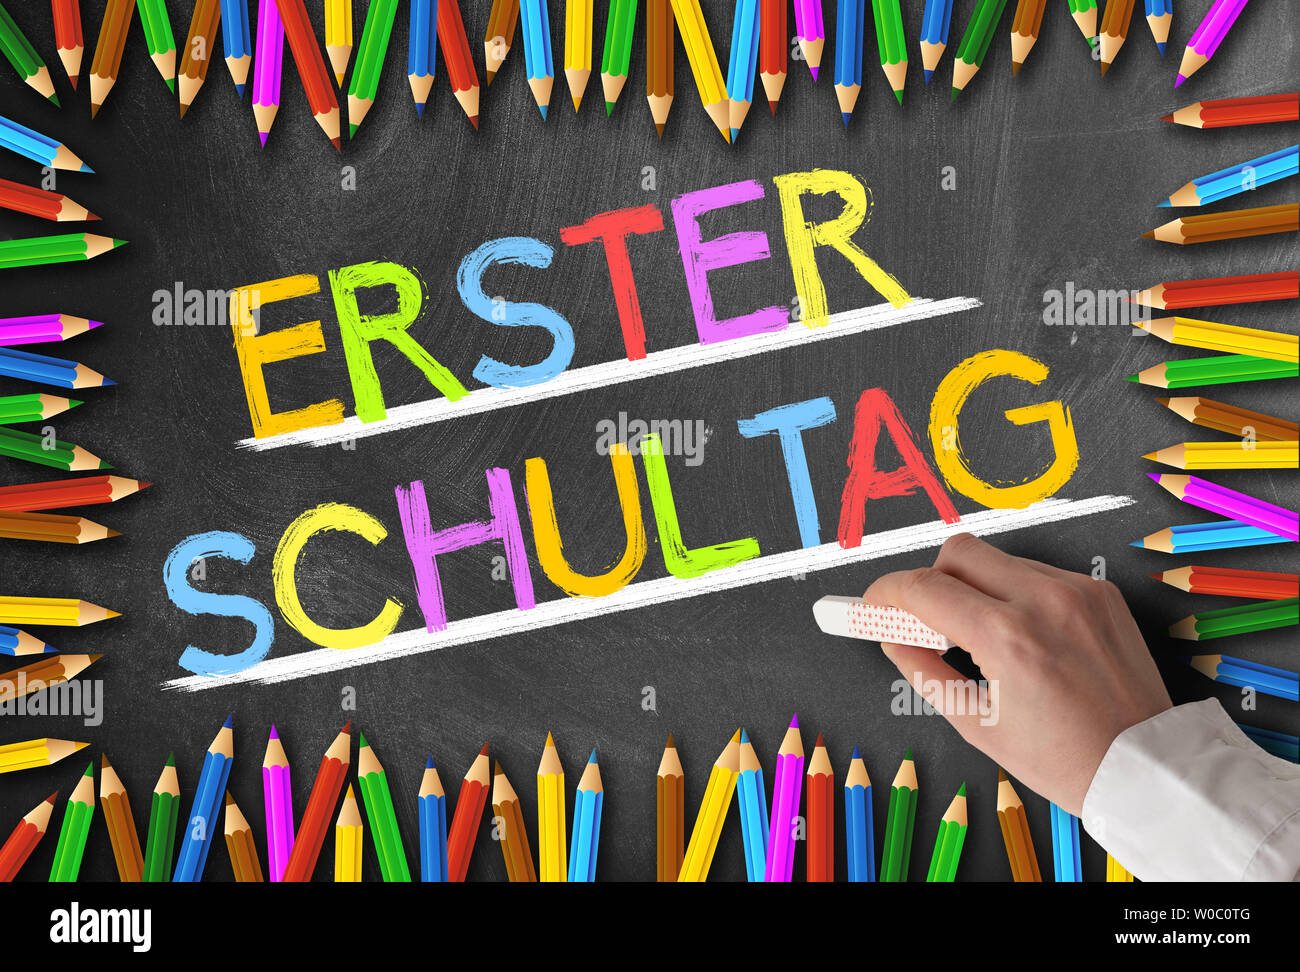 colorful words ERSTER SCHULTAG, German for first day of school, written on chalkboard framed by colored pencils Stock Photo